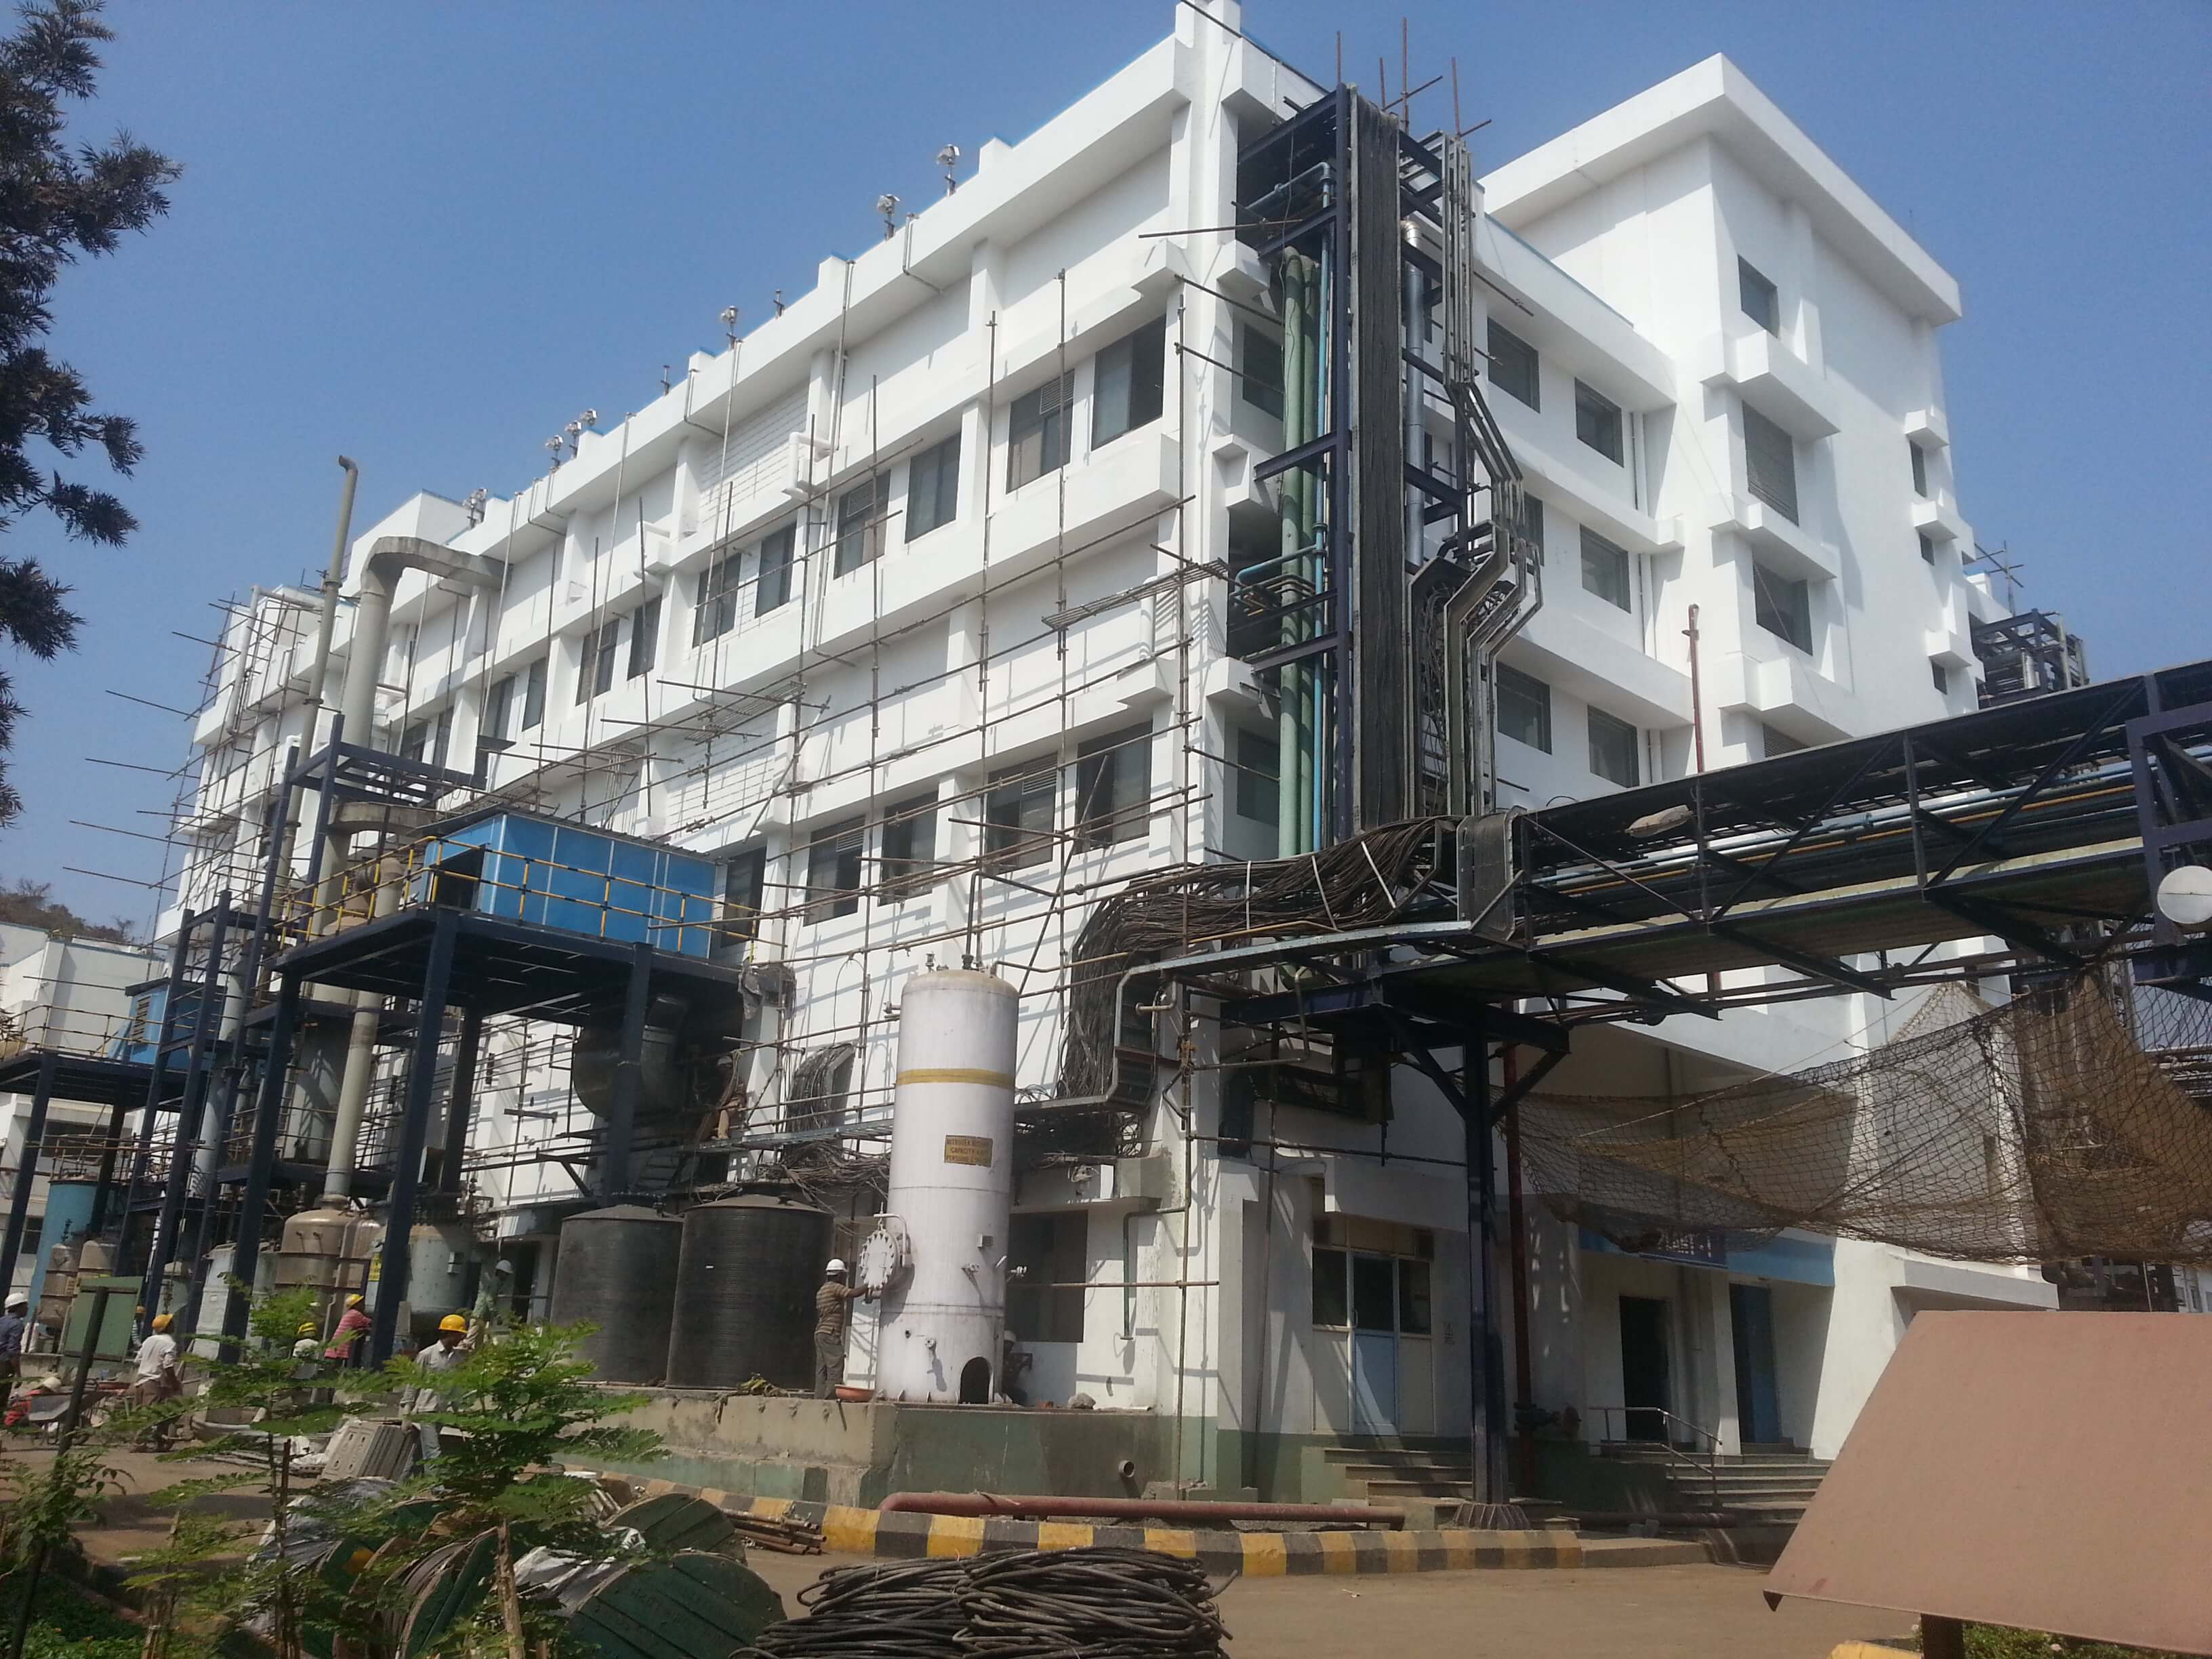 Structural Repair & Strengthening of Pharmaceutical Plant